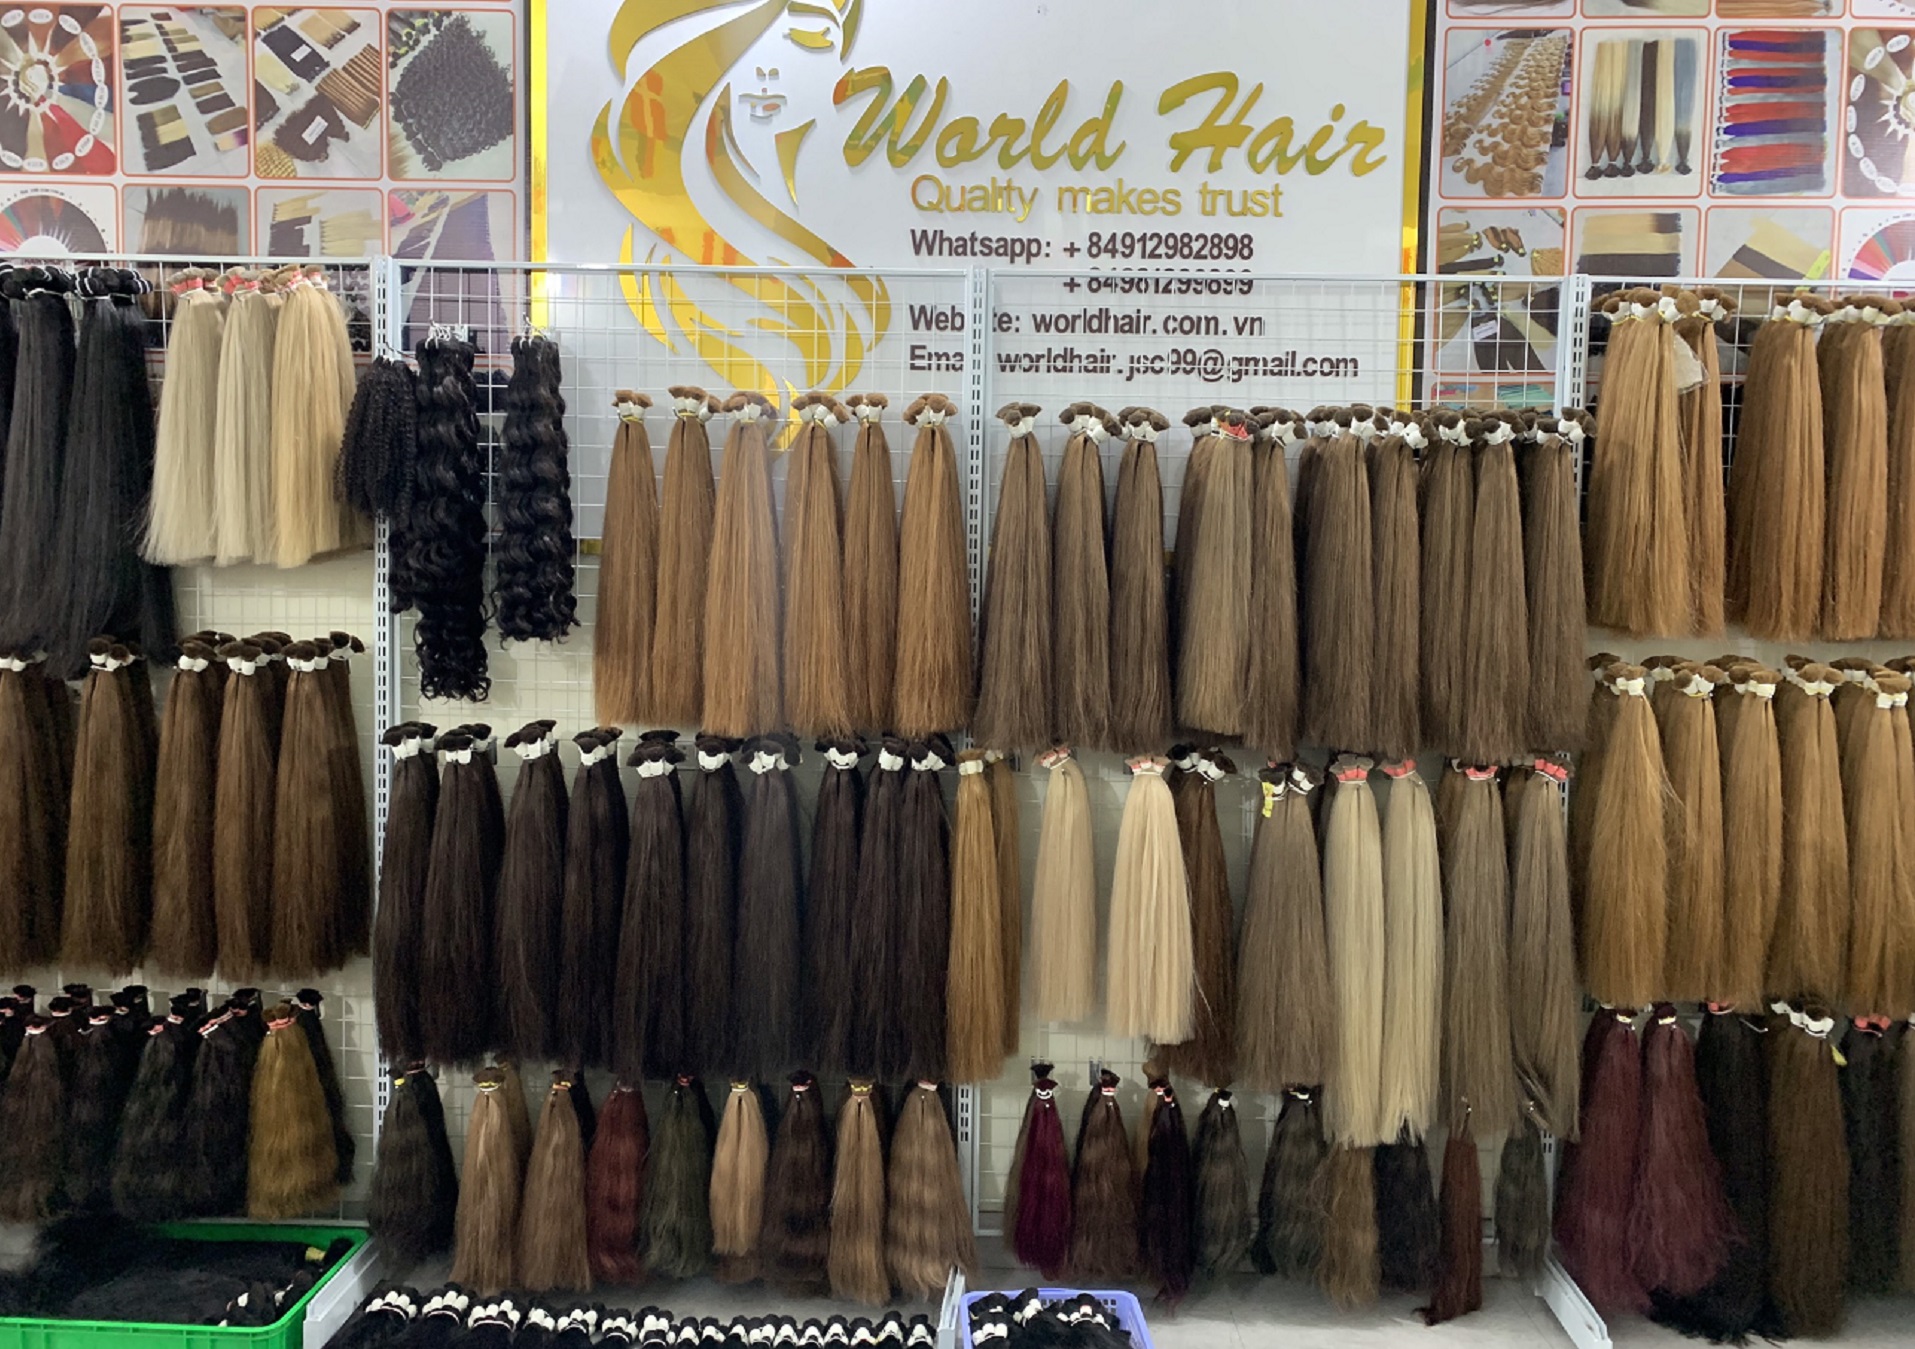 visit the sample products displayed at the factory